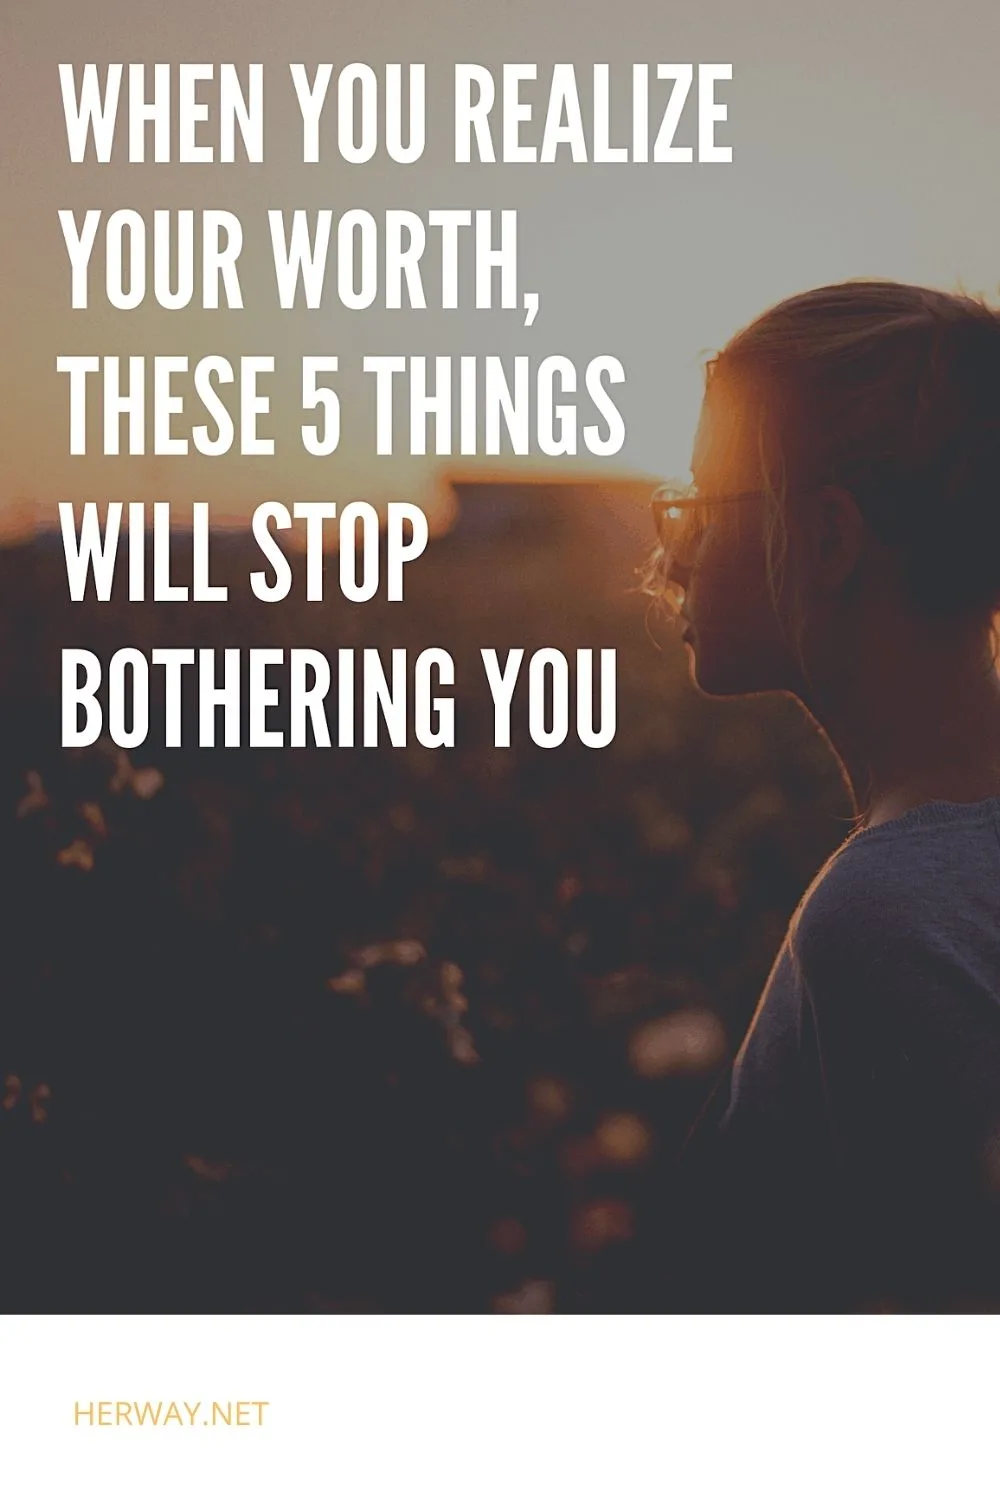 When You Realize Your Worth, These 5 Things Will Stop Bothering You